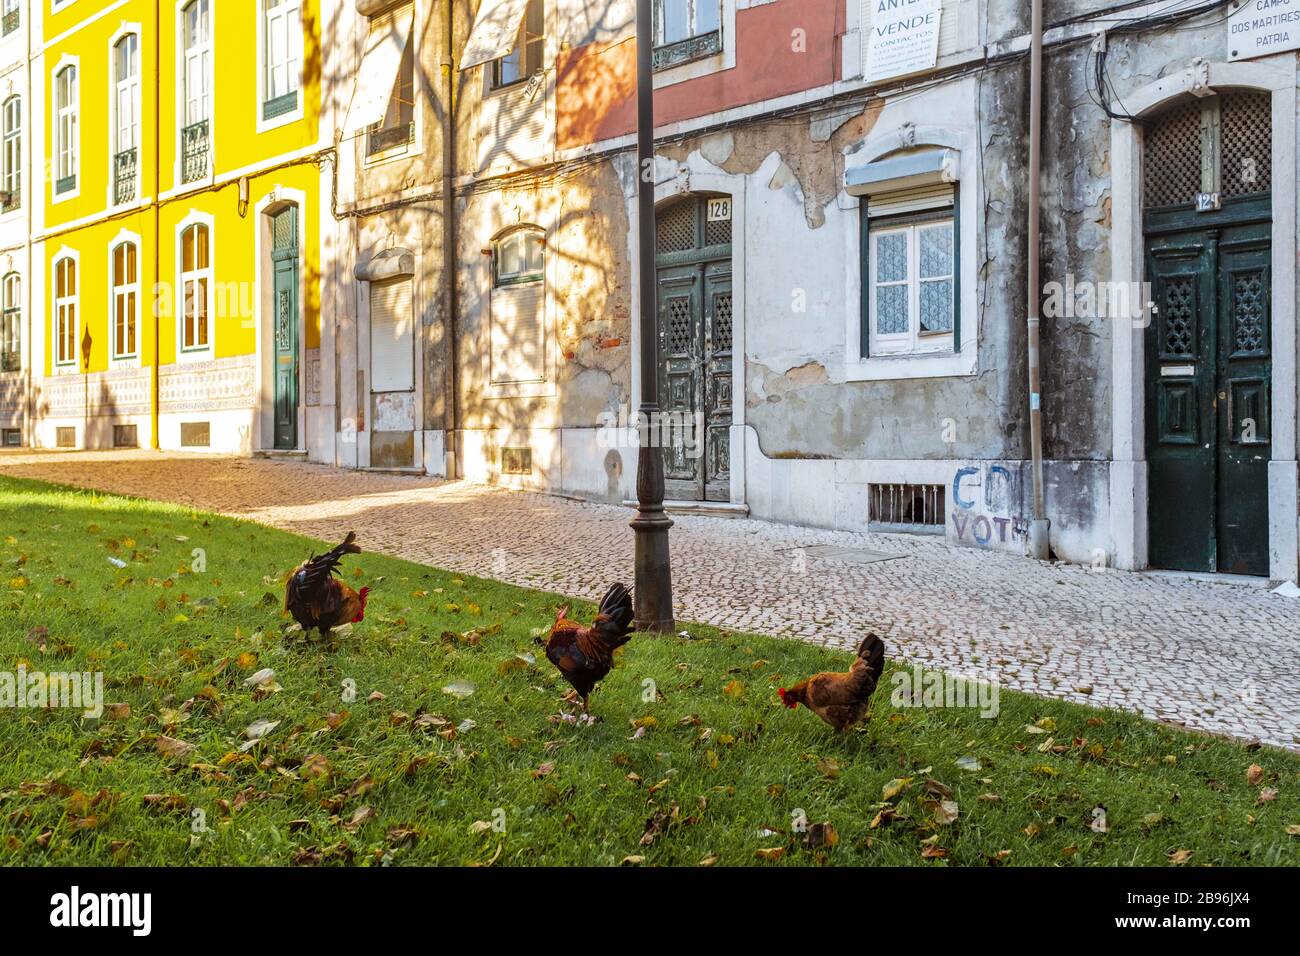 Two roosters and a hen roaming in Jardim Braancamp Freire in Lisbon. Stock Photo